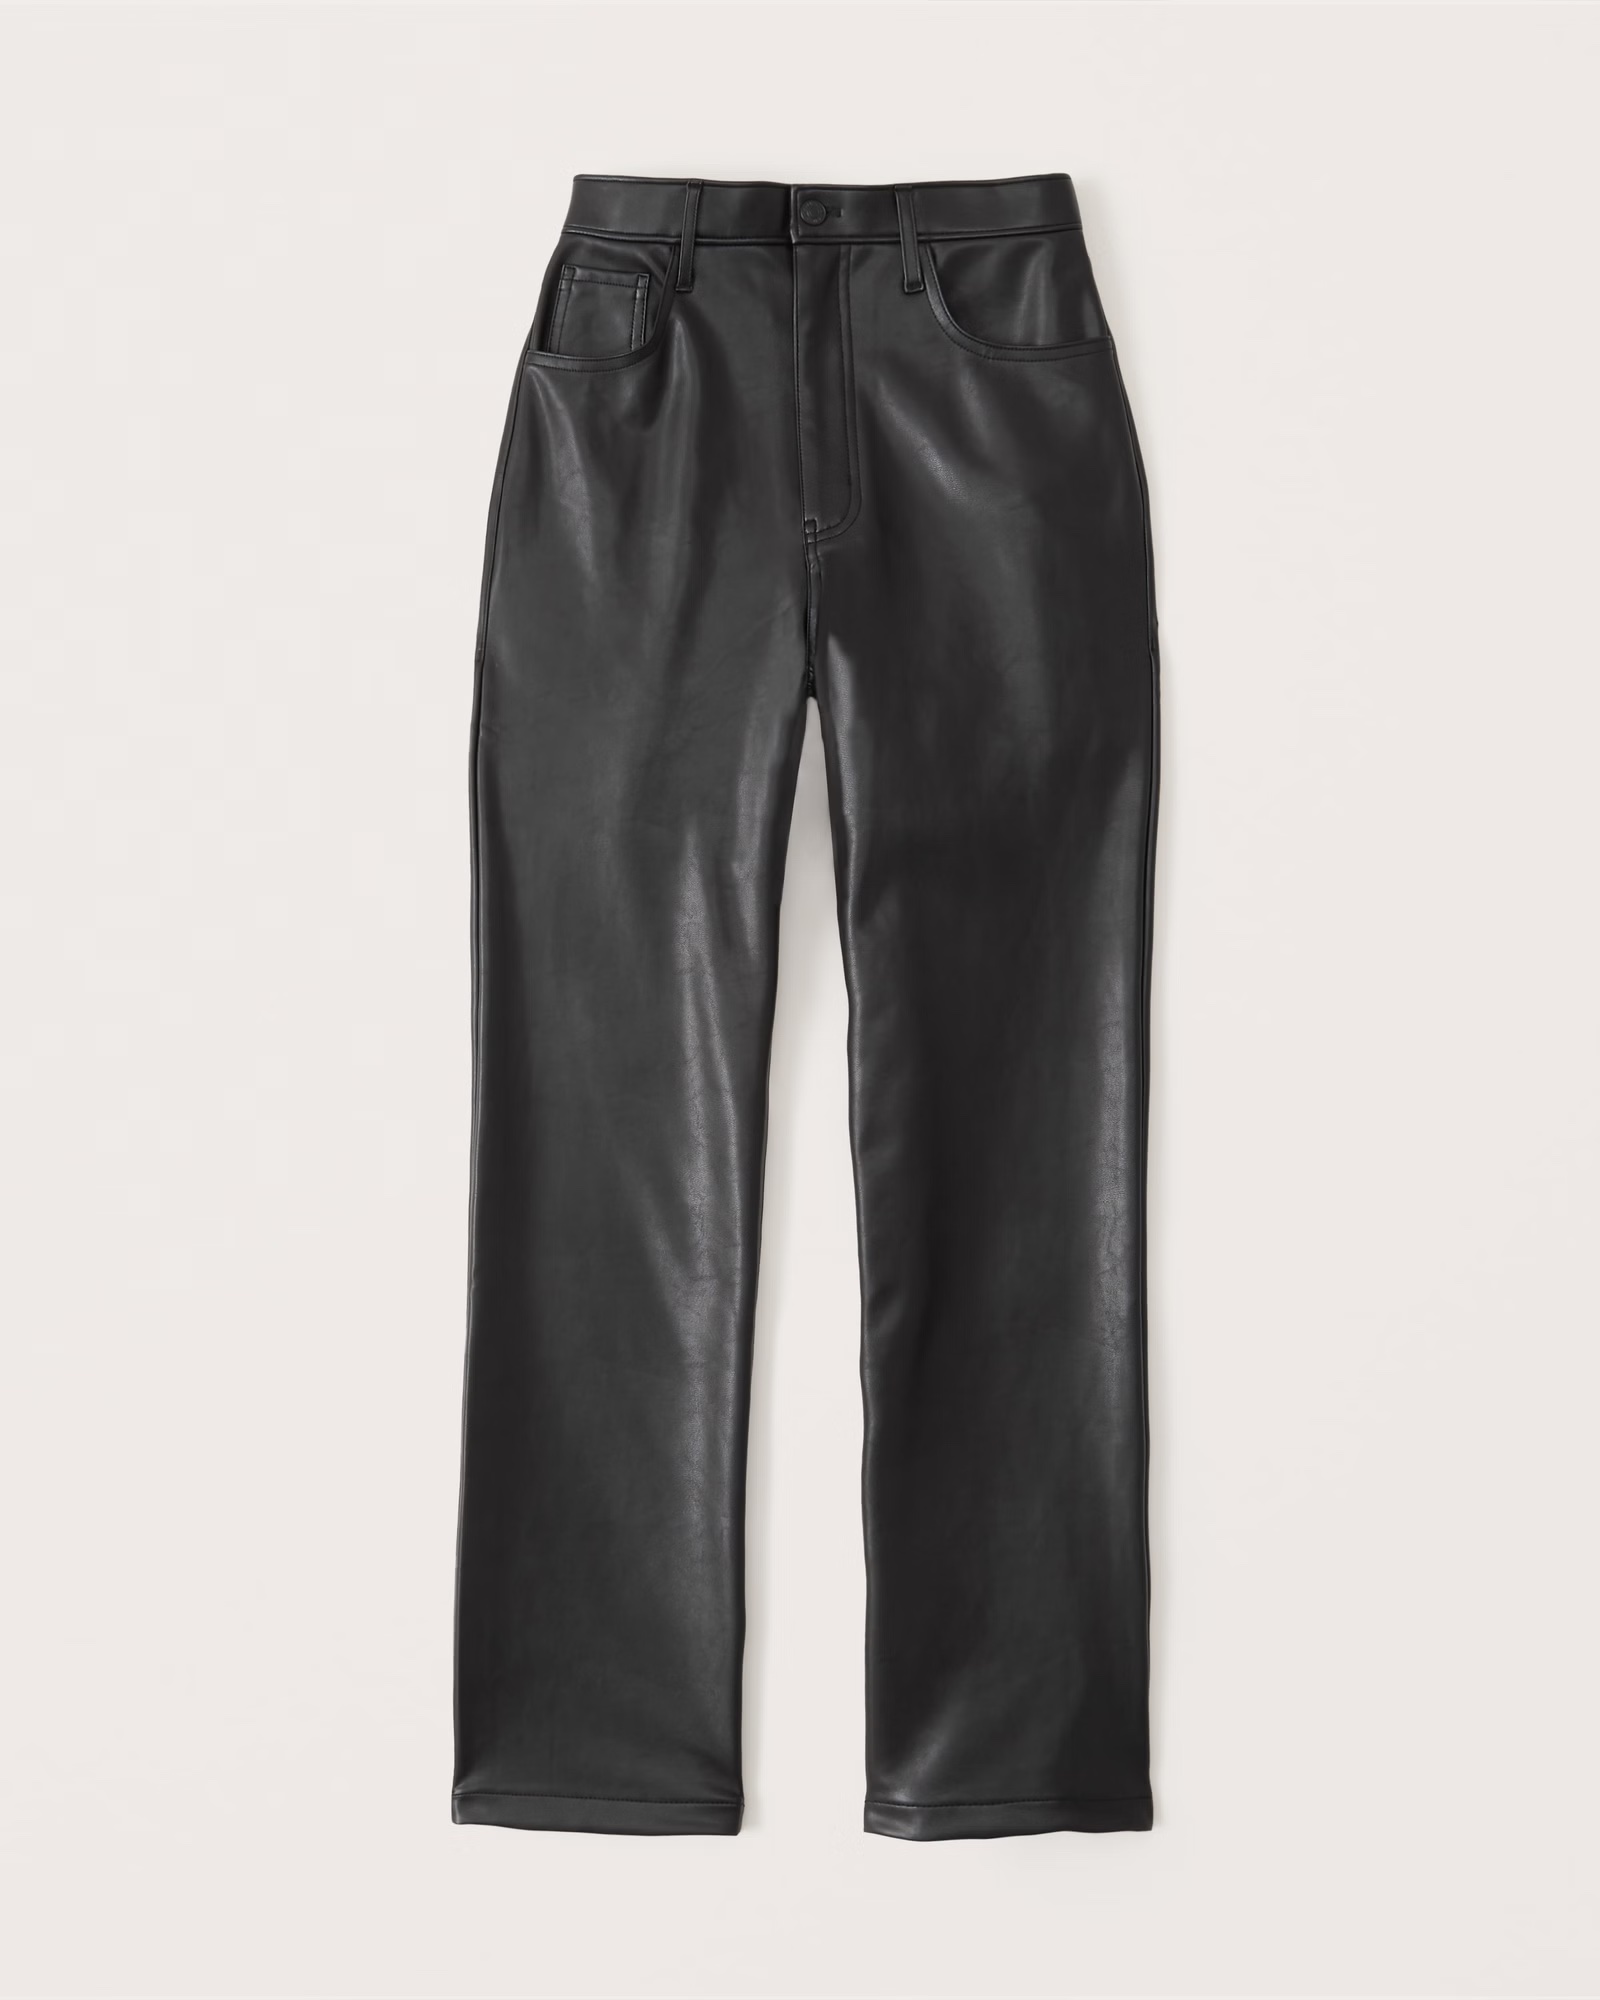 Abercrombie & Fitch + Curve Like Vegan Leather-based fully 90s Straight Pant